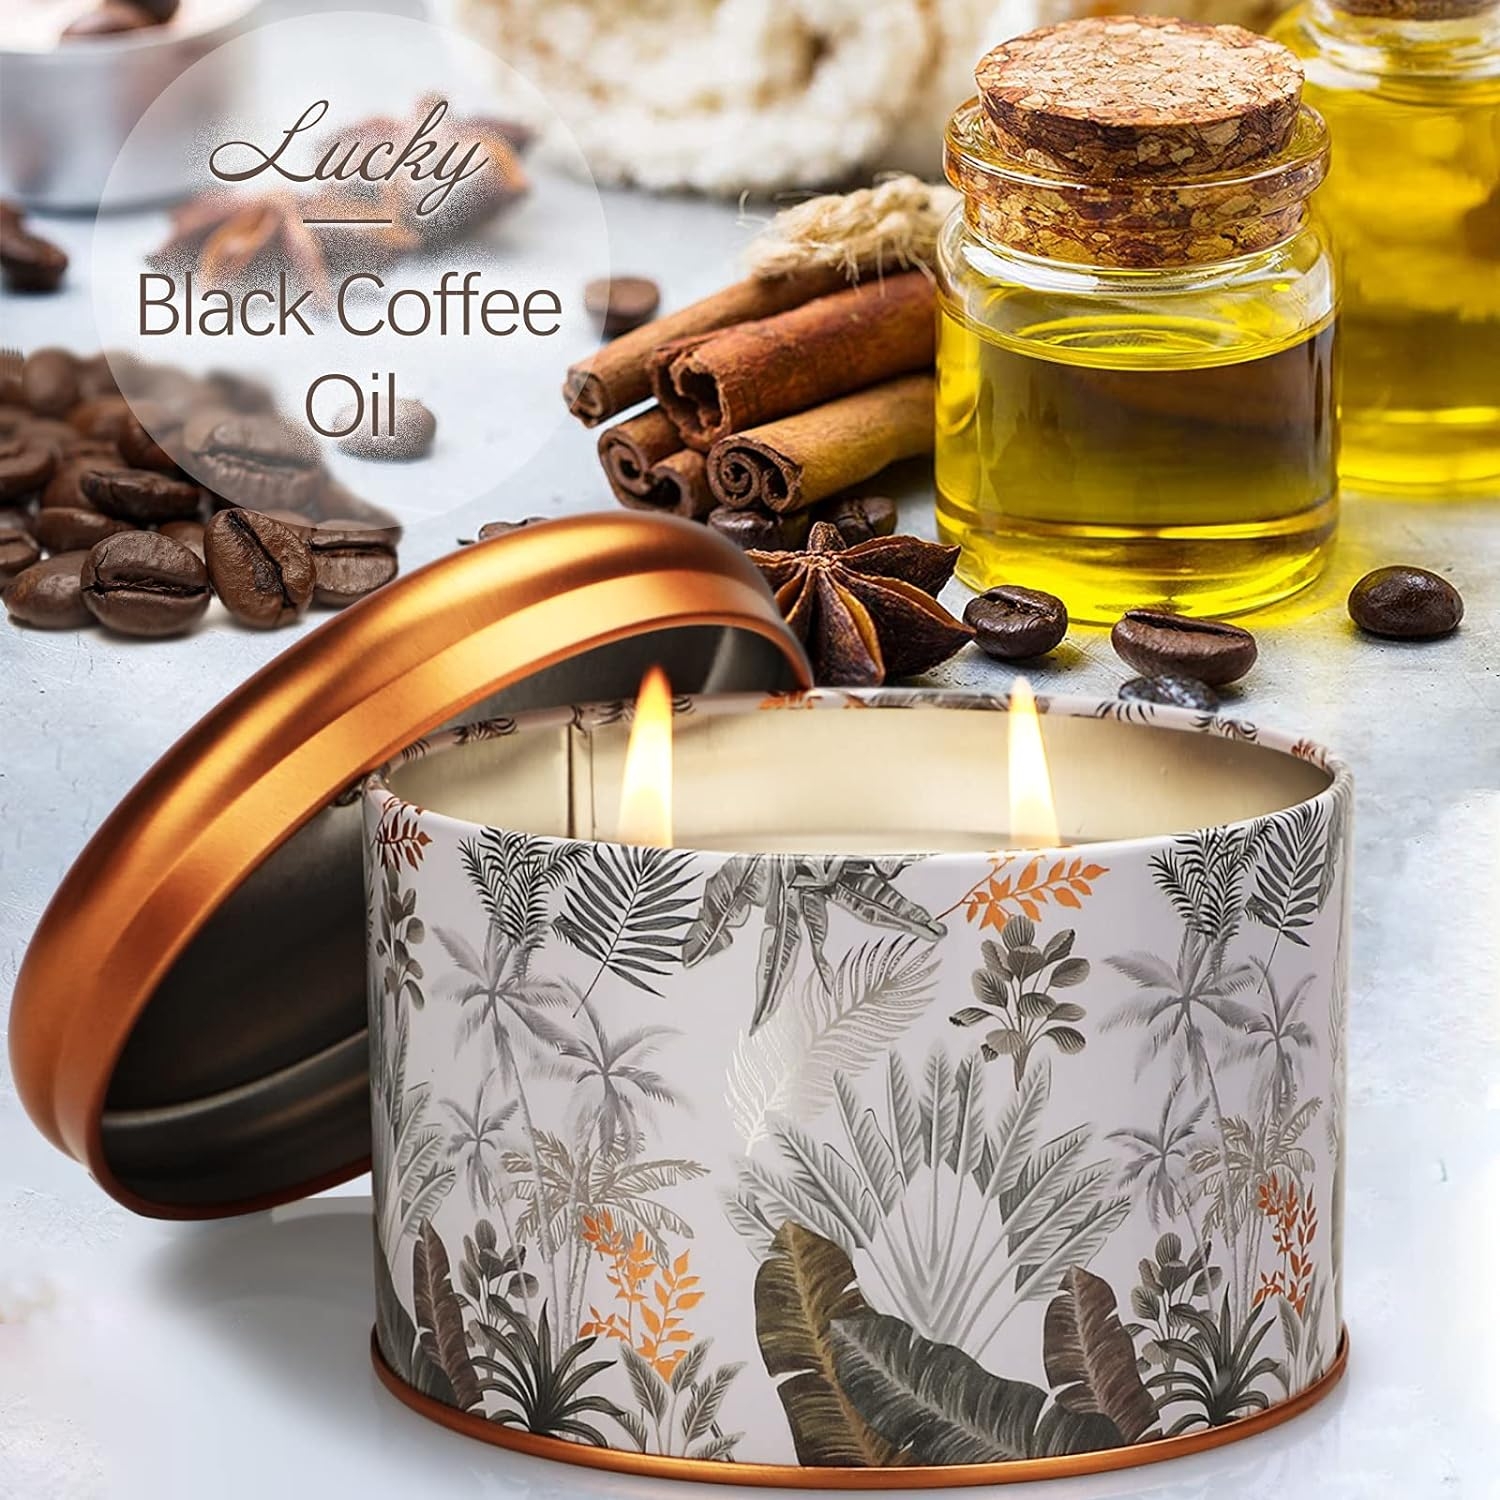 Black Coffee Scented Candle-2 Wicks Large Scented Candle Gift for Women, Premium Soy Wax Aromatherapy Candle for Home Spa Stress Relief Birthday Mother's Day Christmas, 14.1oz Long Burning Candle